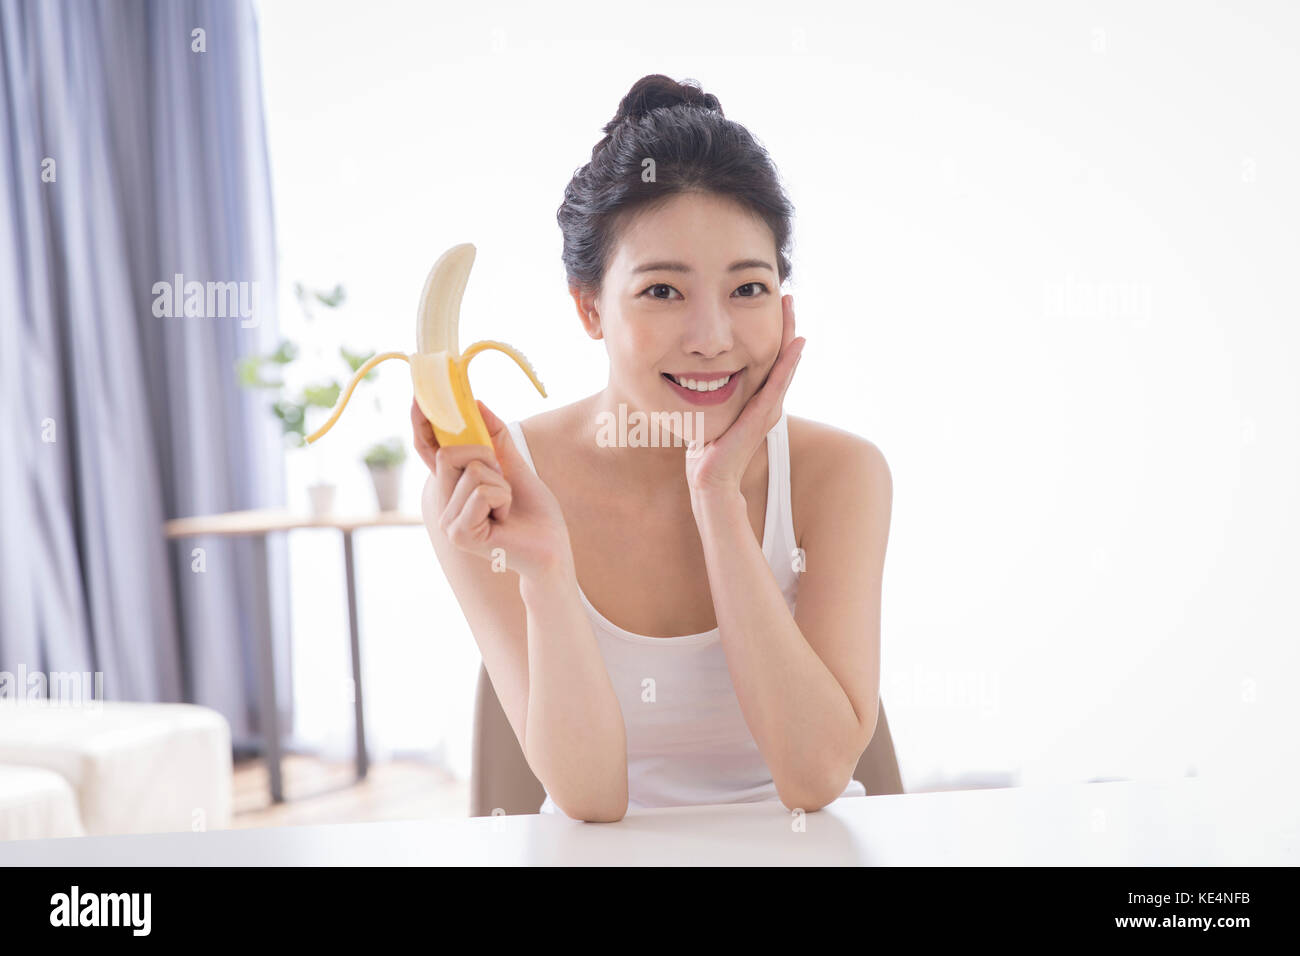 Portrait of young smiling woman eating banana slim Banque D'Images